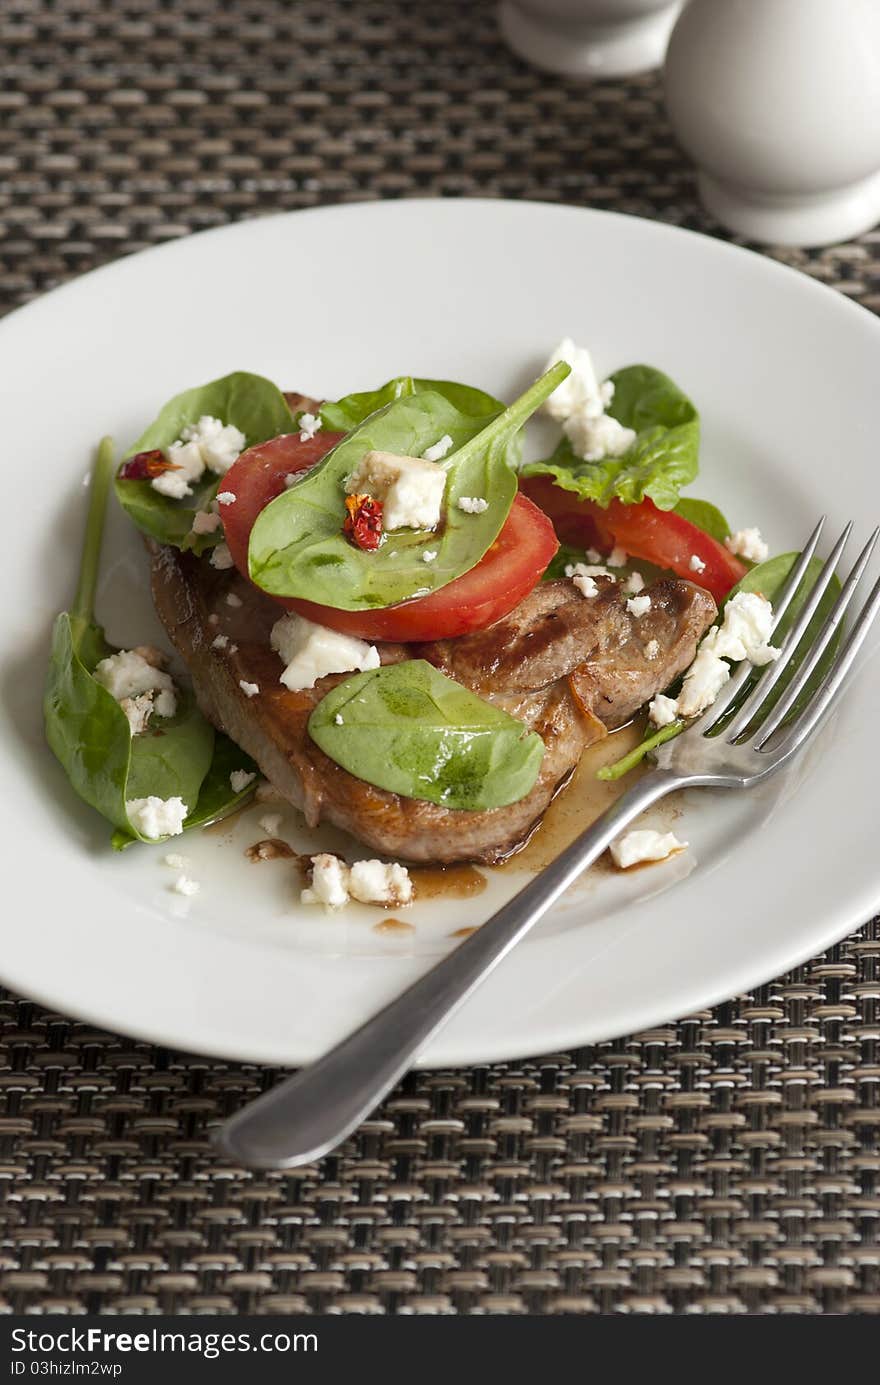 Steak with tomatoes, spinach and feta cheese